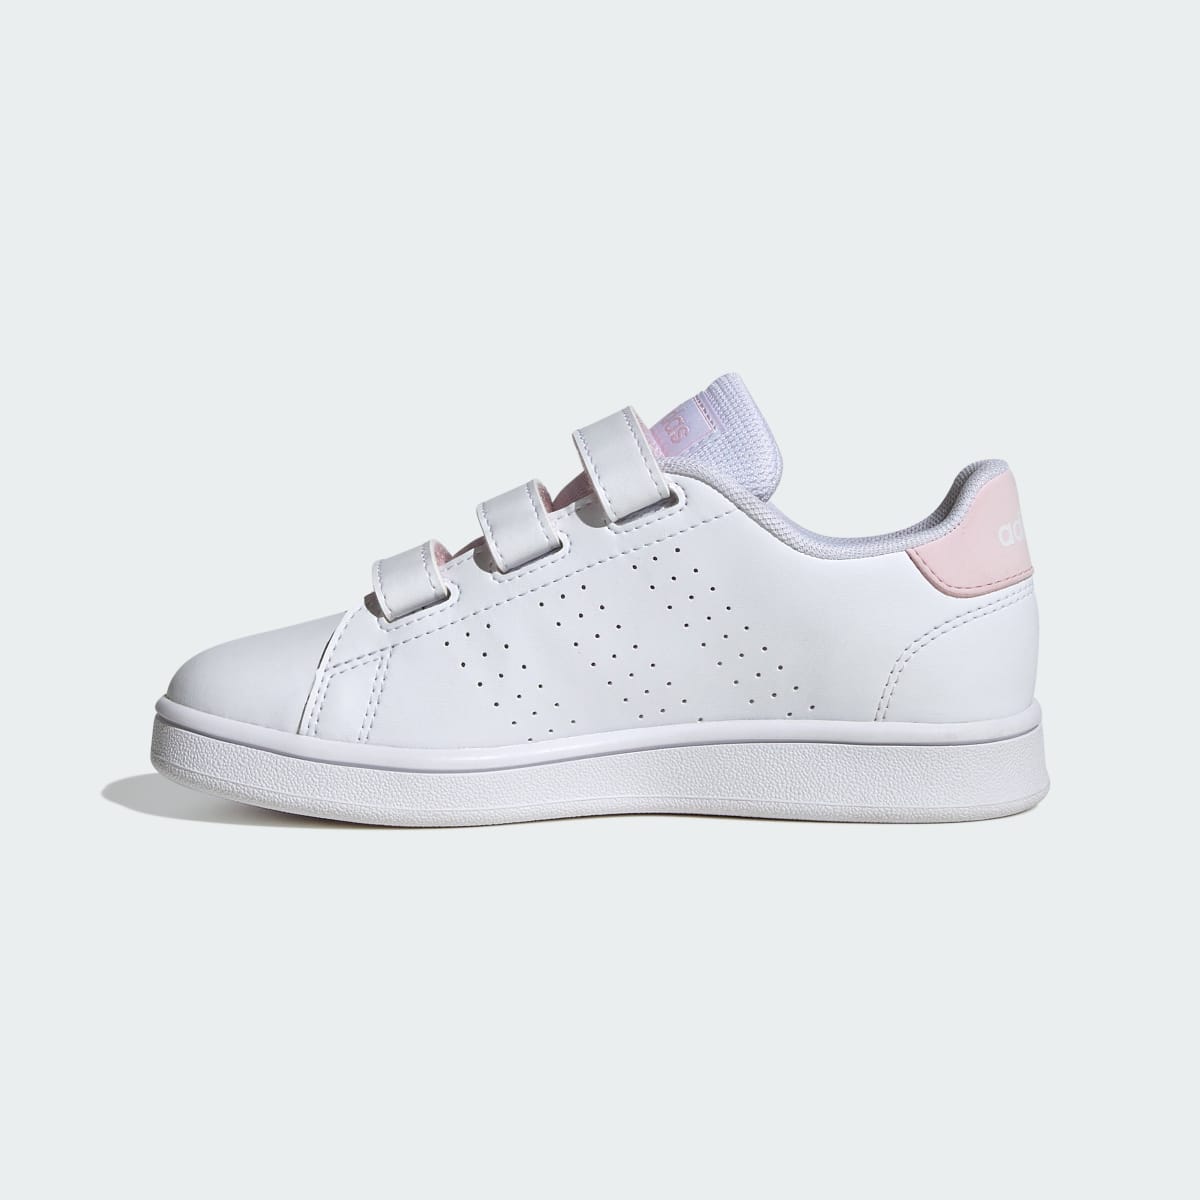 Adidas Advantage Court Lifestyle Hook-and-Loop Shoes. 7